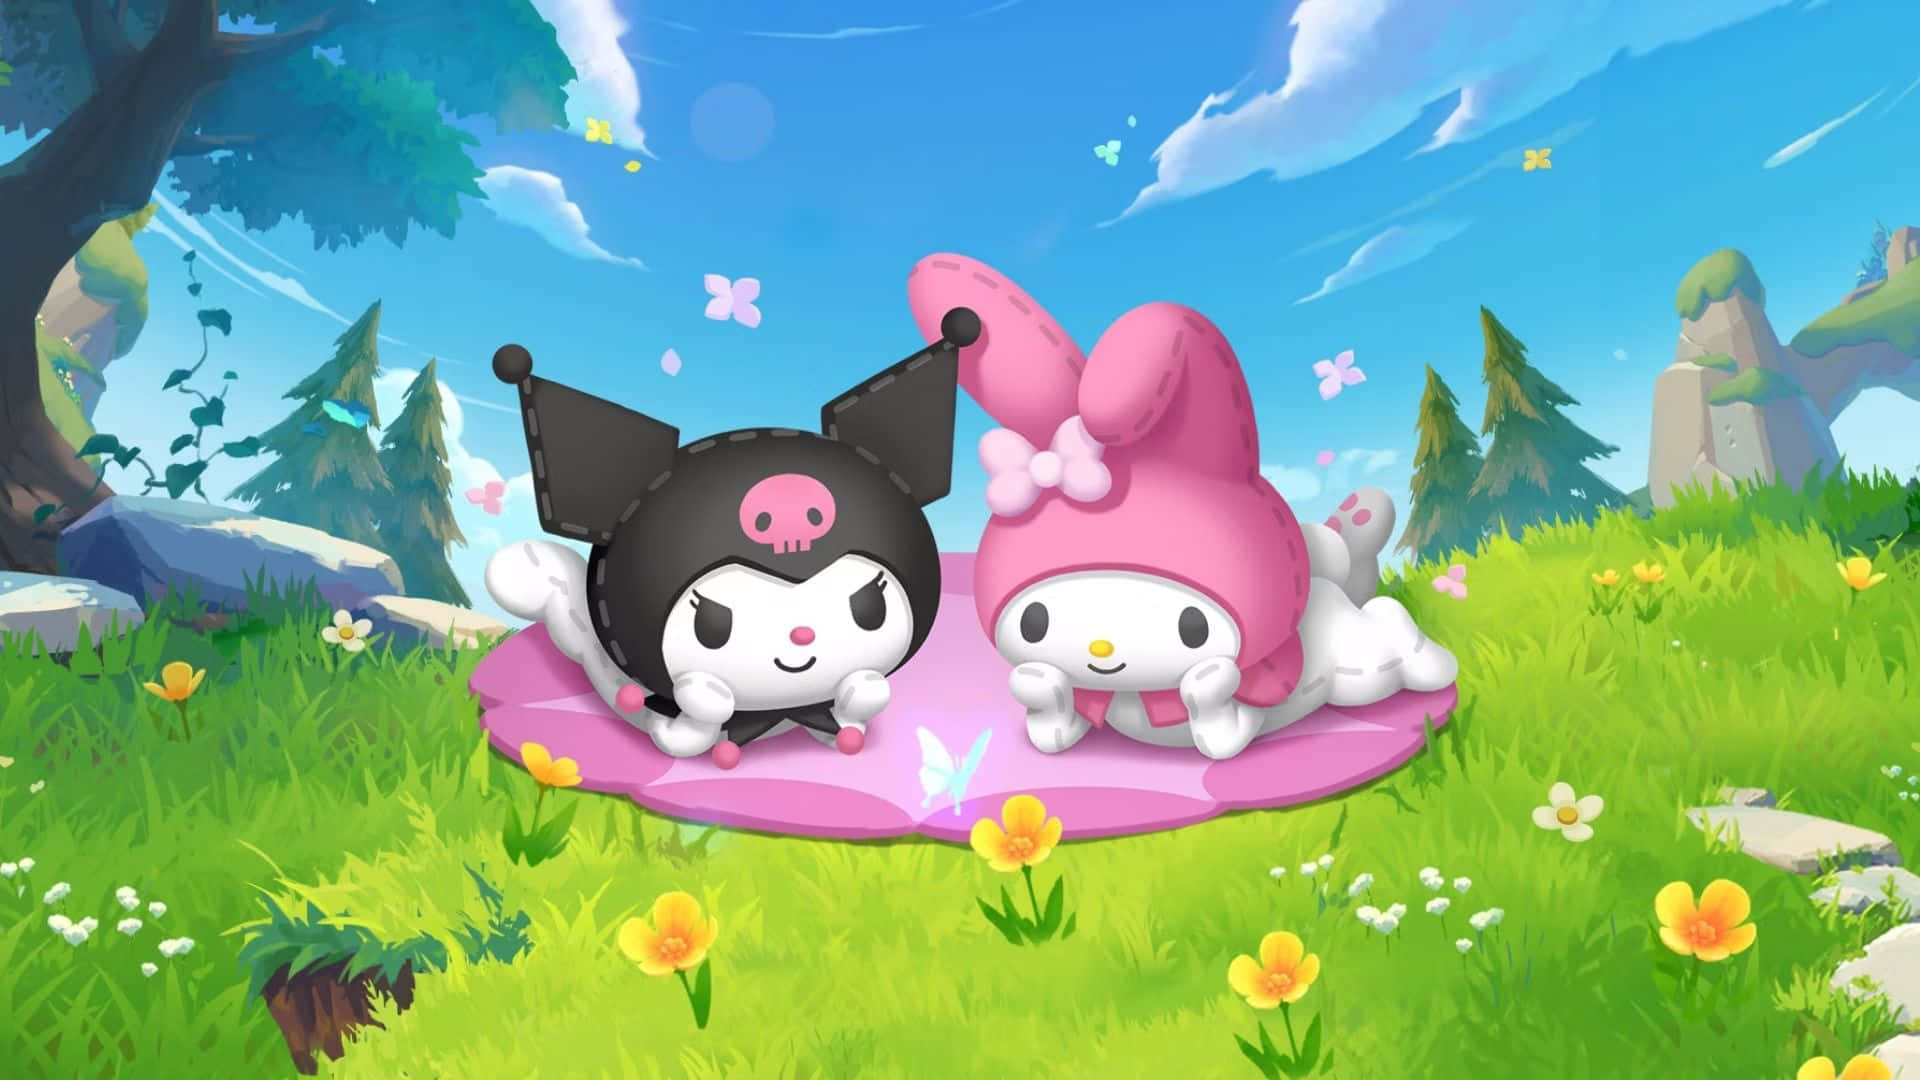 Kuromi and My Melody share a fun-filled moment together Wallpaper